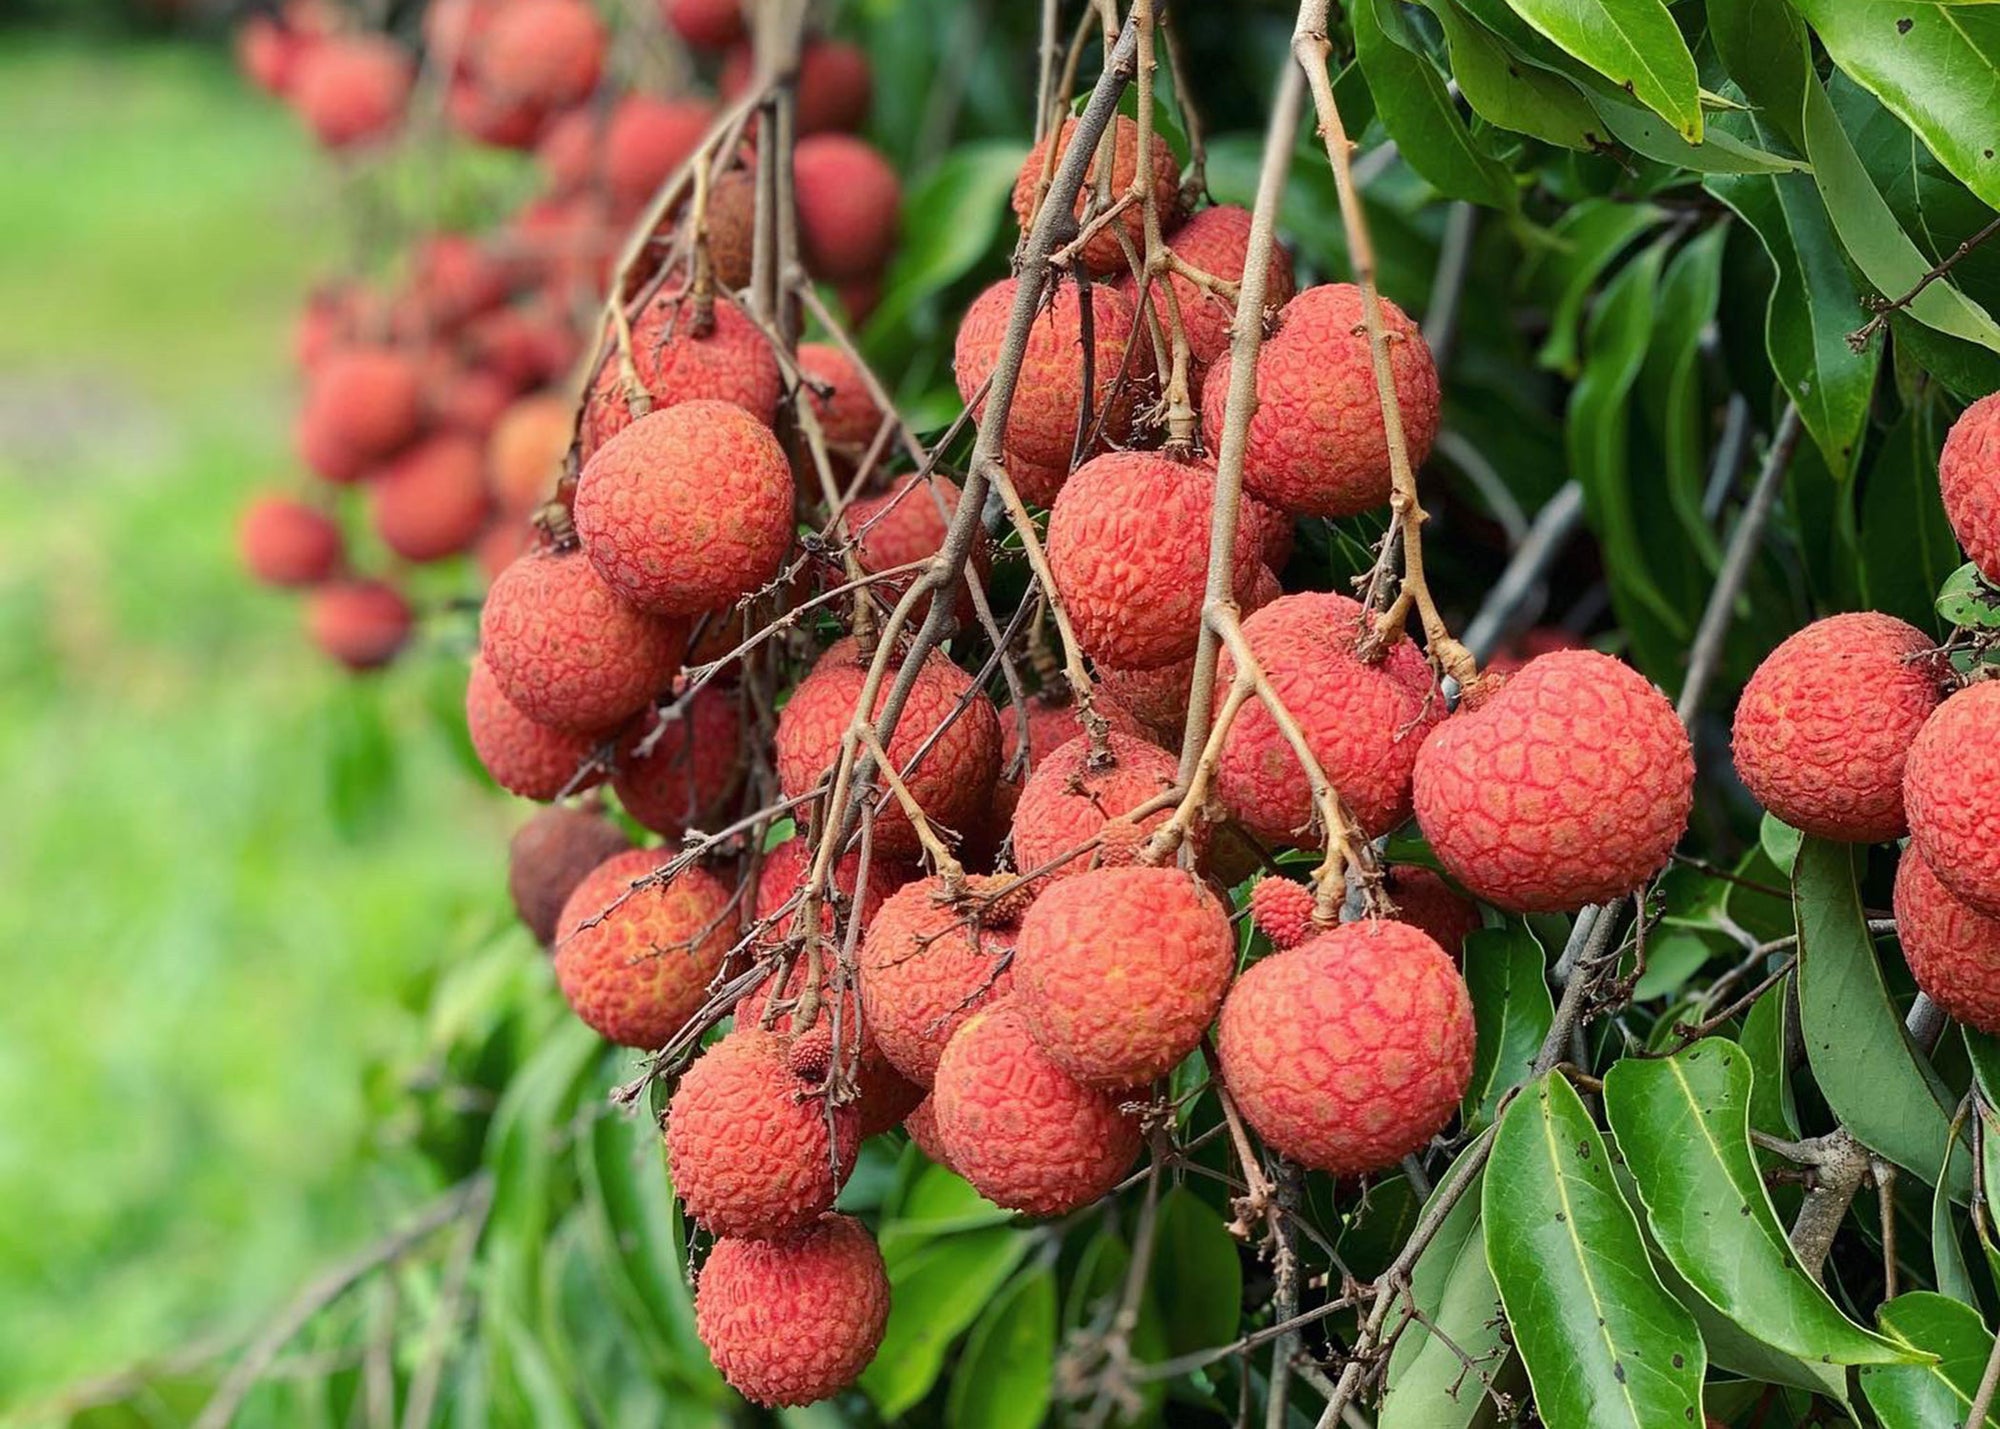 Fresh, ripe lychee fruit on branches of lychee tree. Kaimana lychee fruit from Hula Brothers.